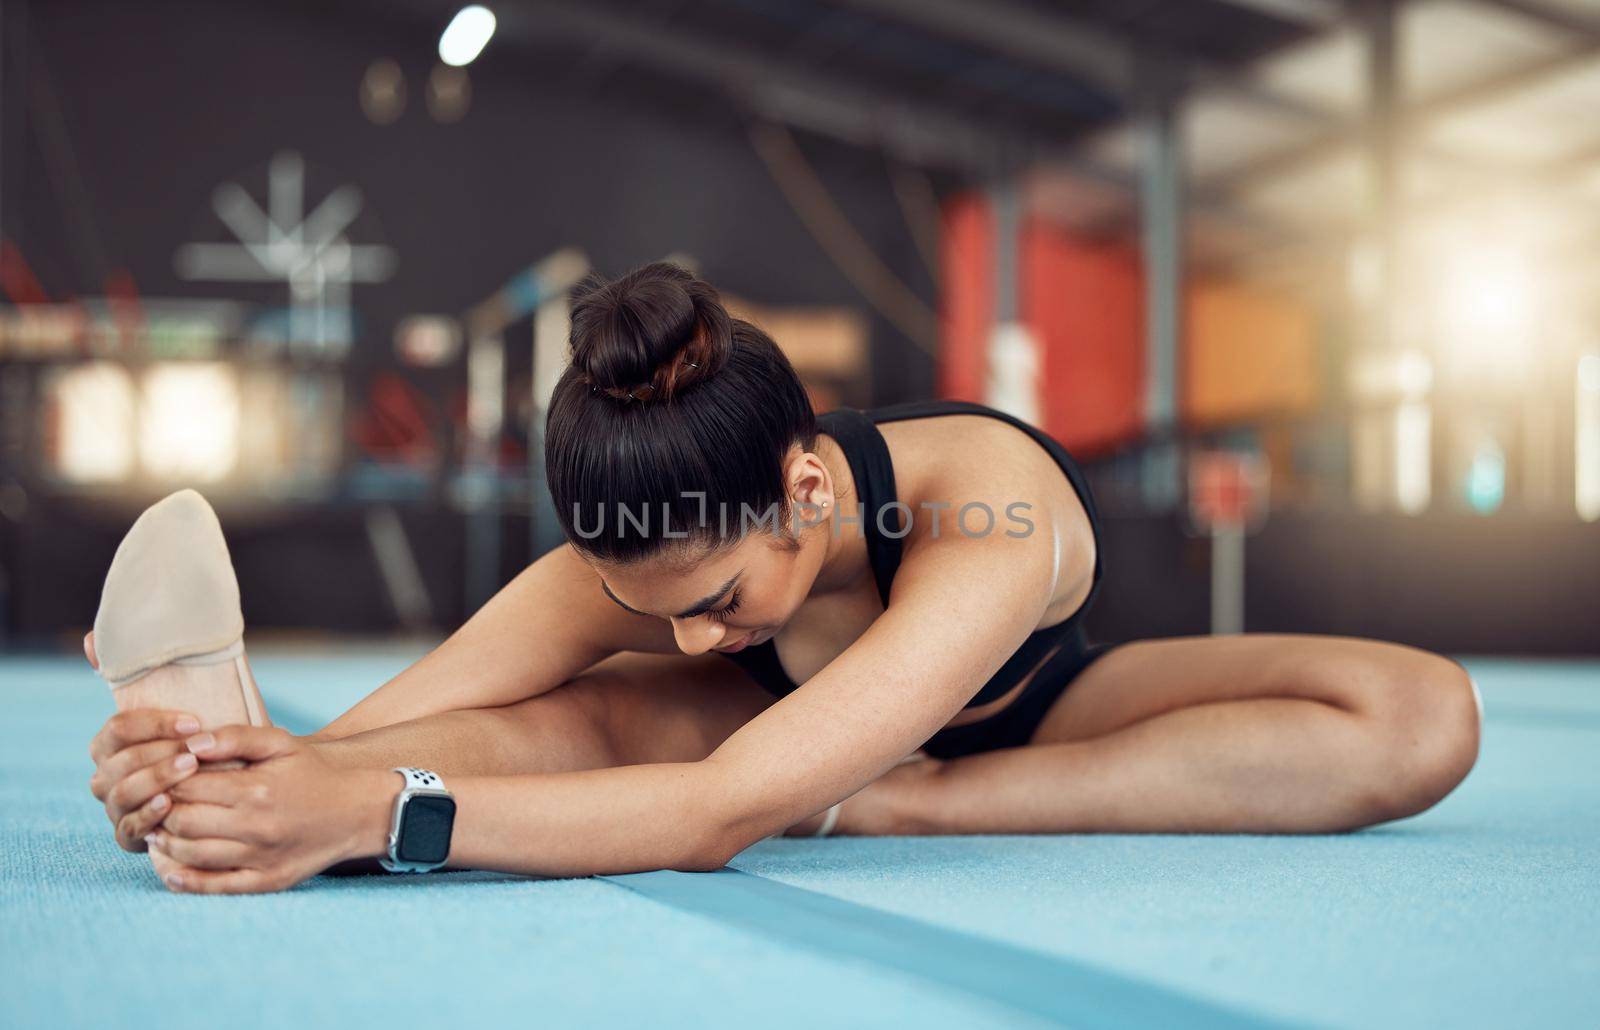 Exercise, fitness and health, woman in a gym, stretching before workout. A girl, gymnast or dancer doing yoga or pilates to start training. Motivation, wellness and sports for healthy, fit lifestyle.